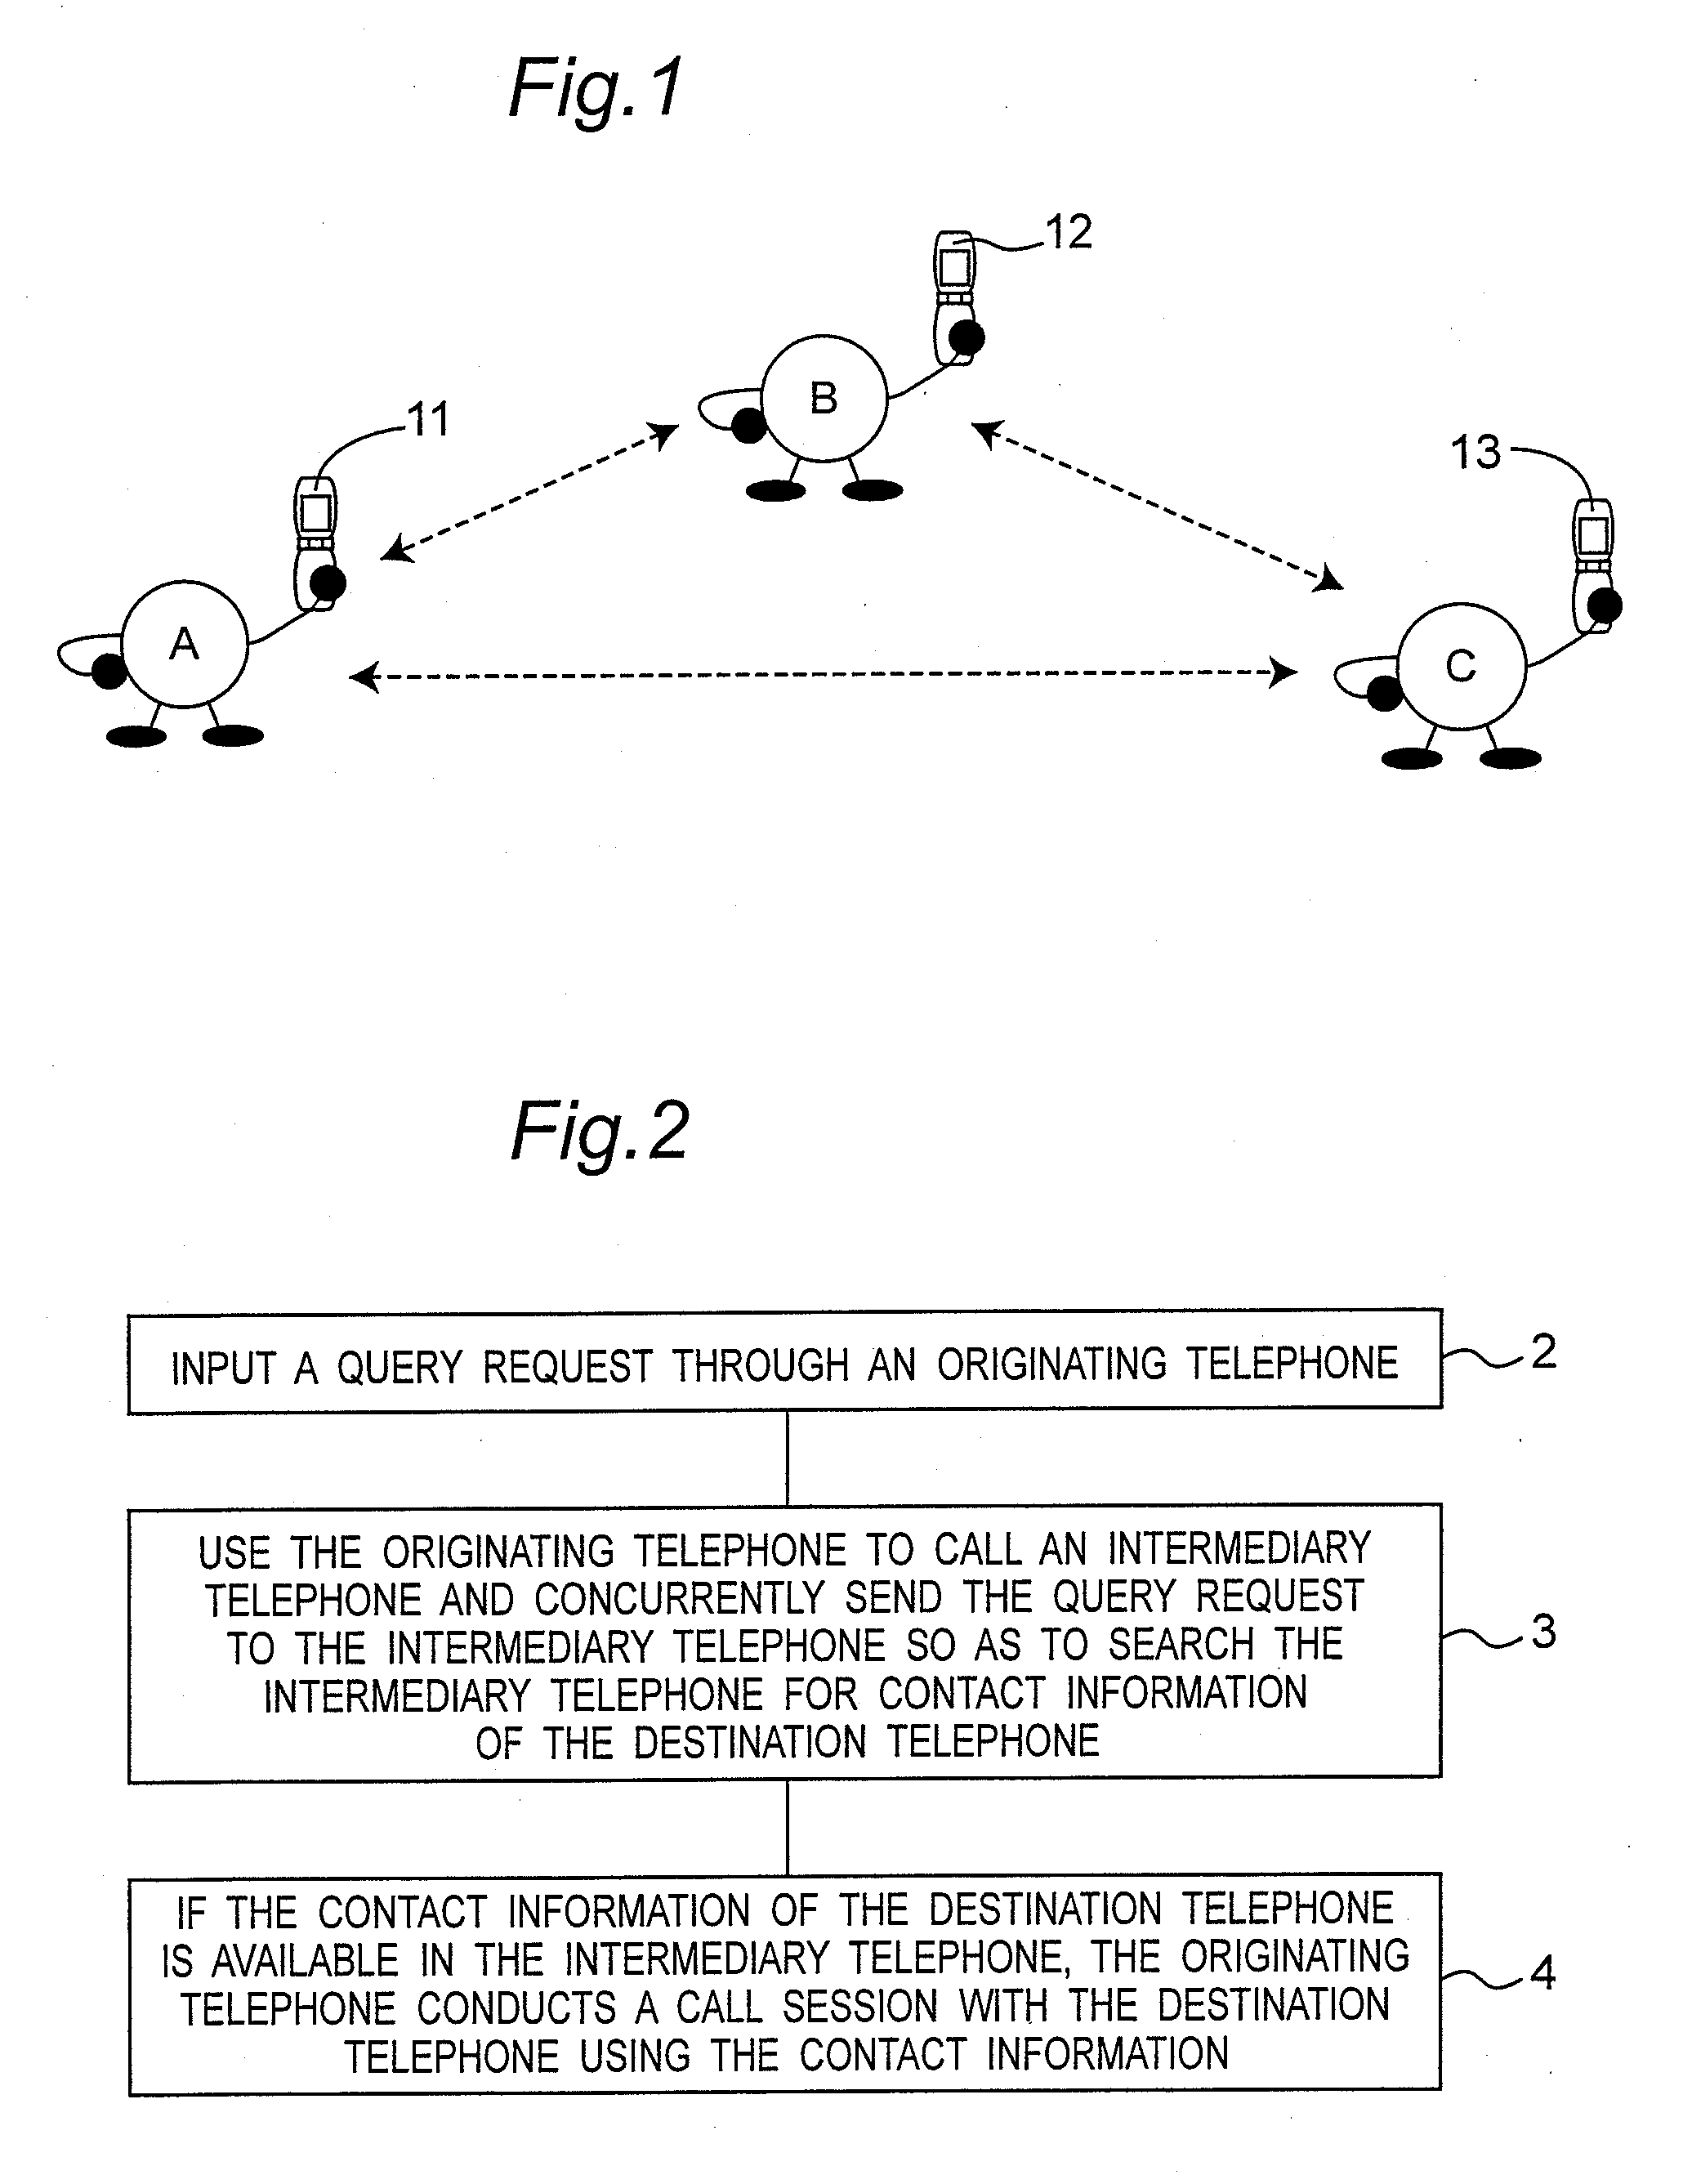 Method and system for enabling originating and destination telephones to conduct a call session